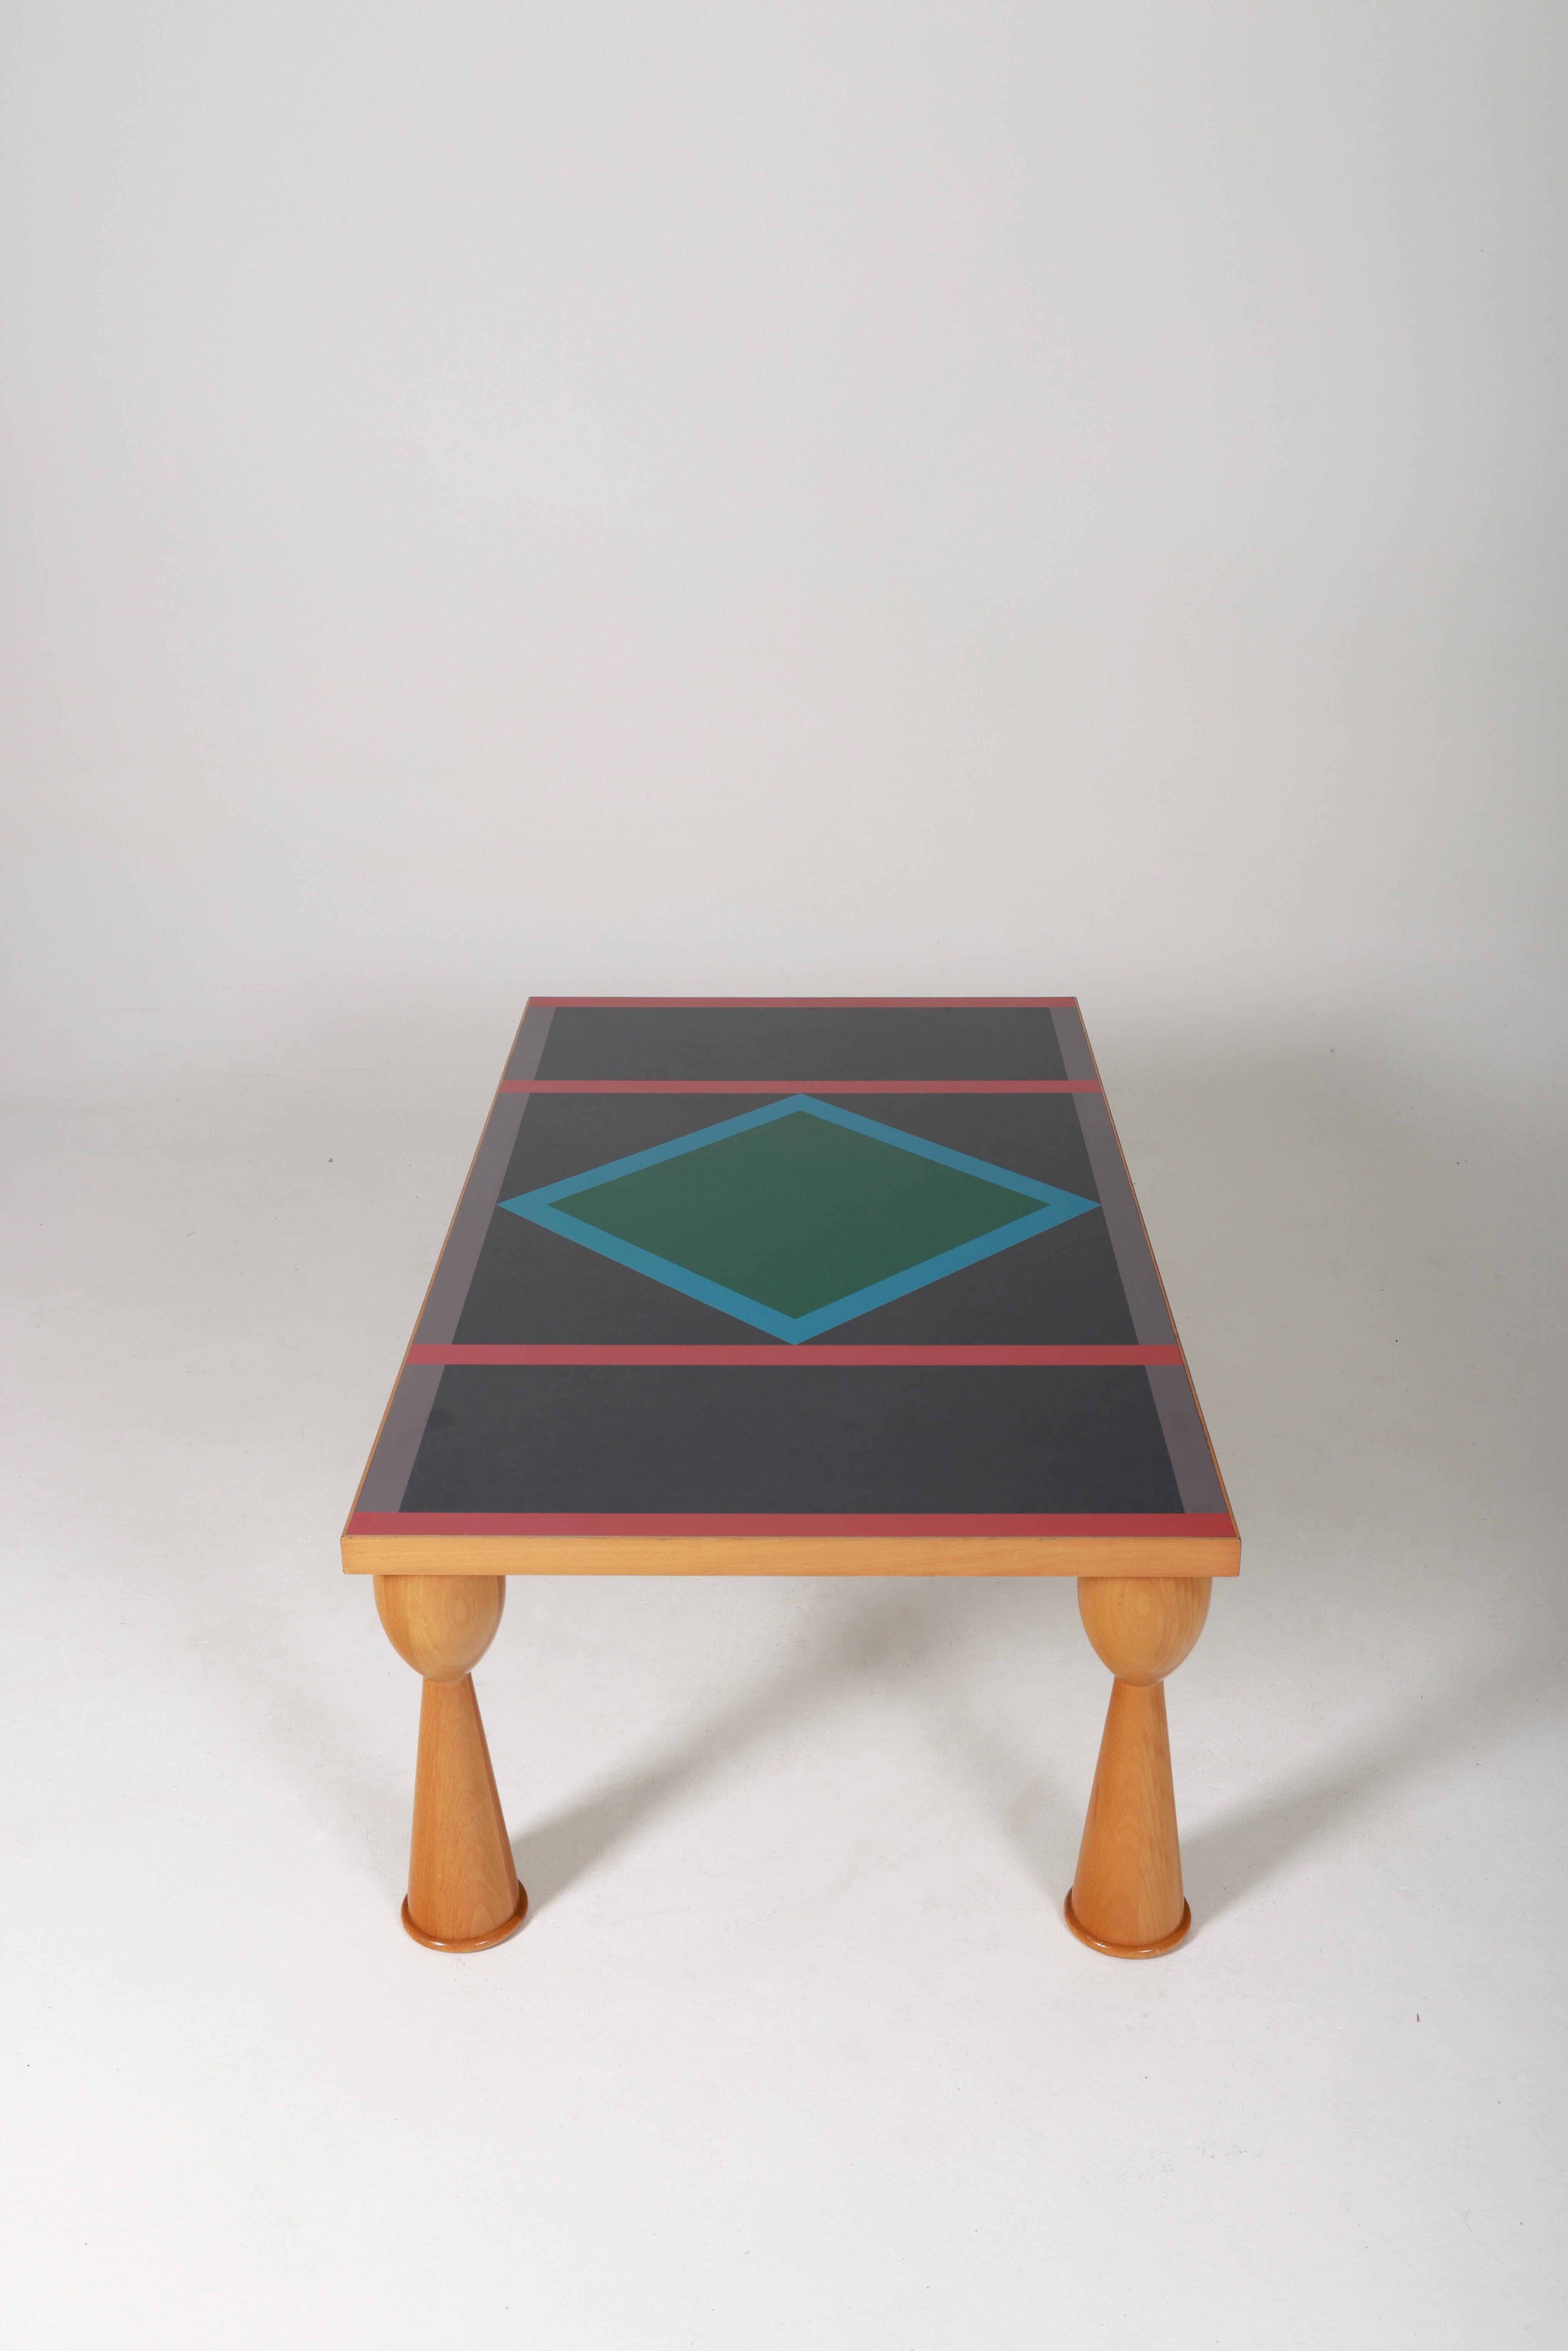 20th Century Coffee Table By Ettore Sottsass And Marco Zanini For Zanotta, 1990s